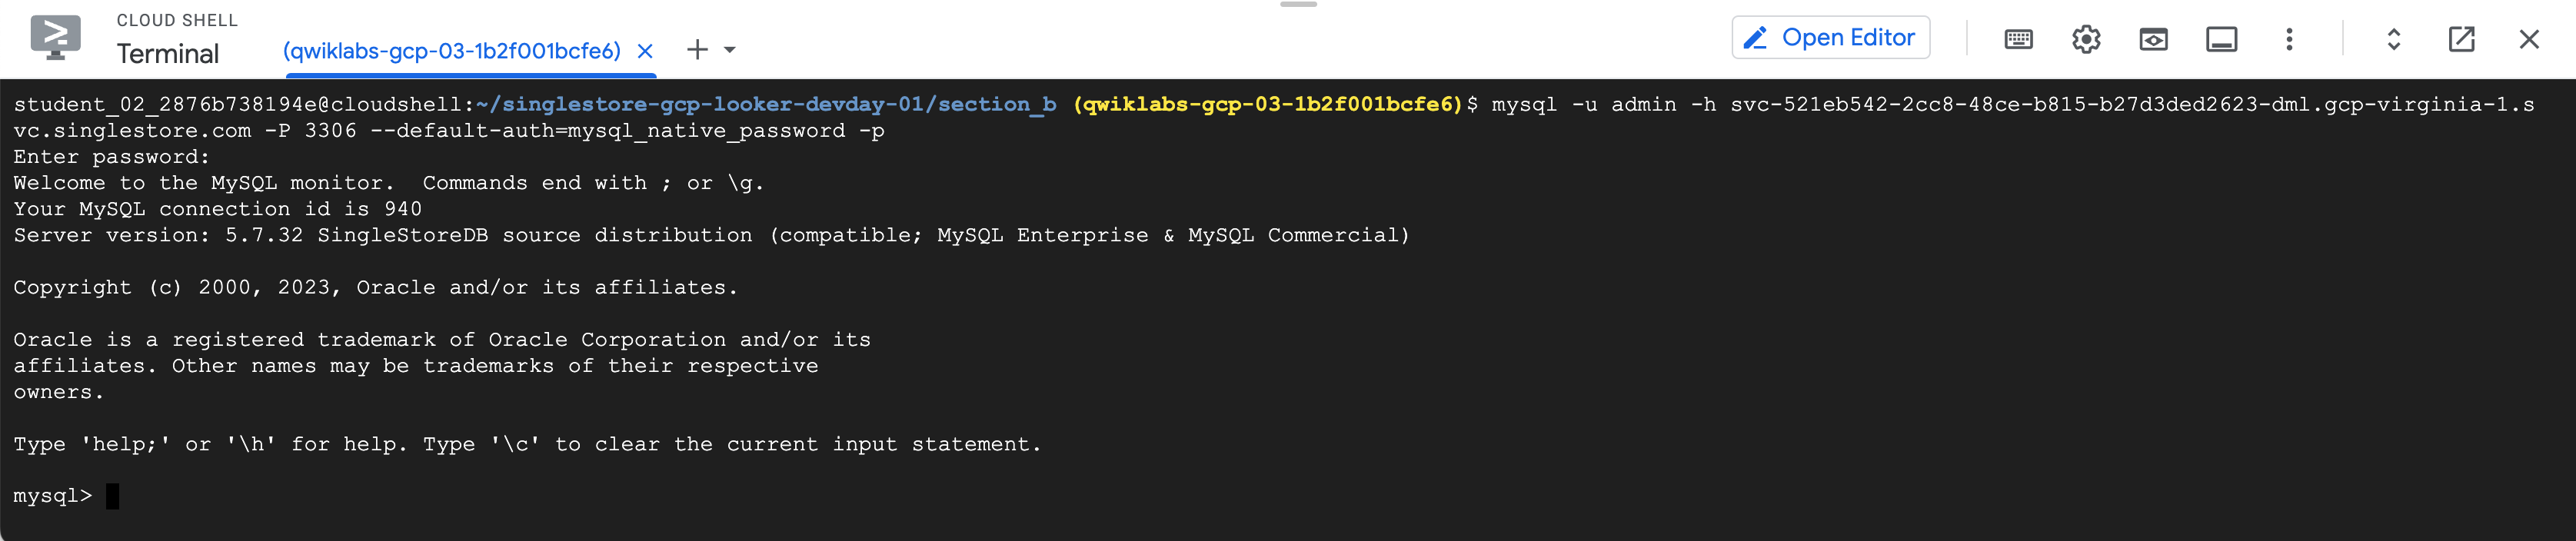 connected to mysql